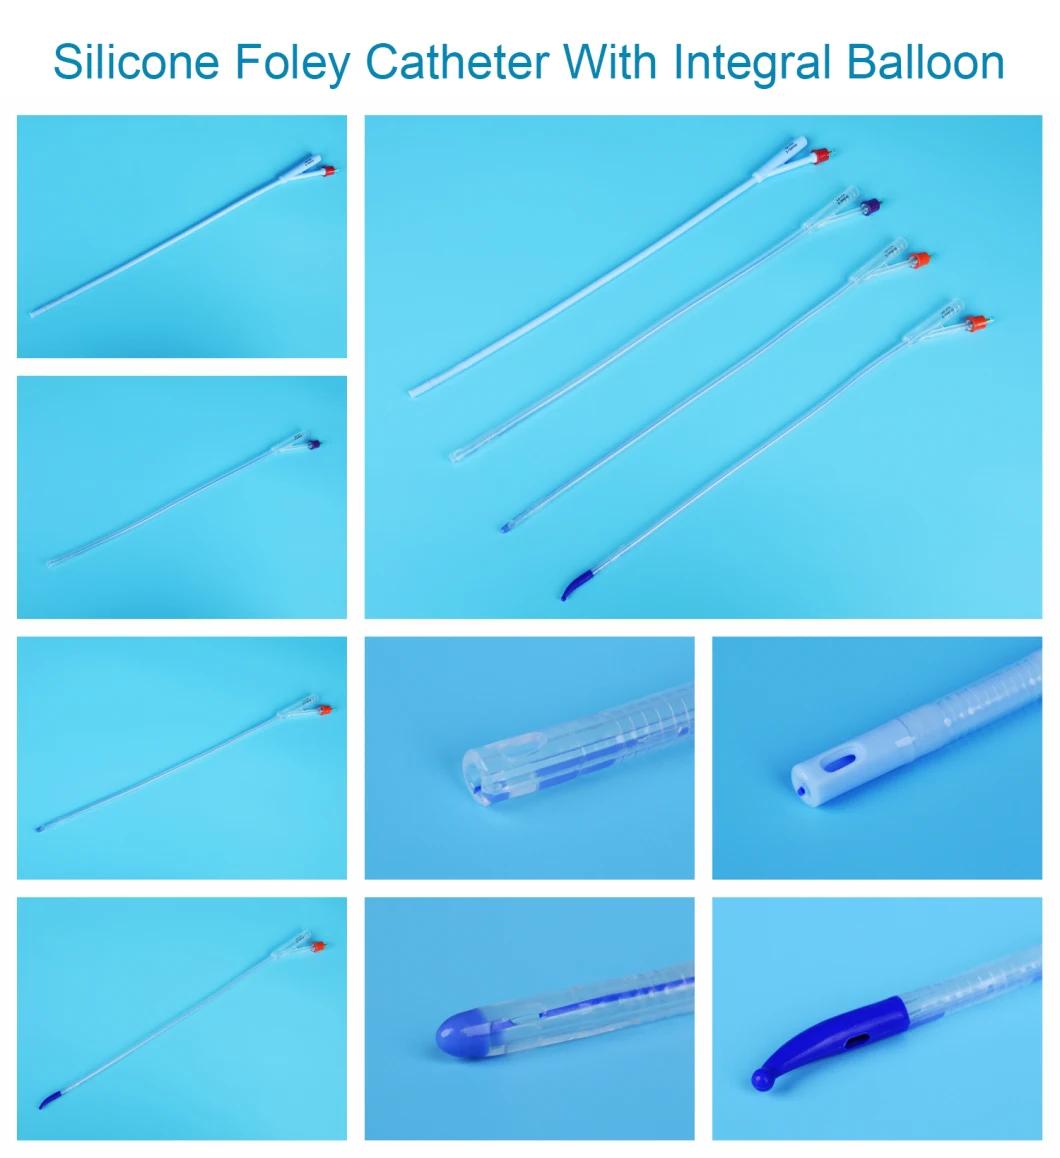 Integrated Flat Balloon Silicone Urinary Catheter with Unibal Integral Balloon Technology Opentipped Suprapubic Use Two Way